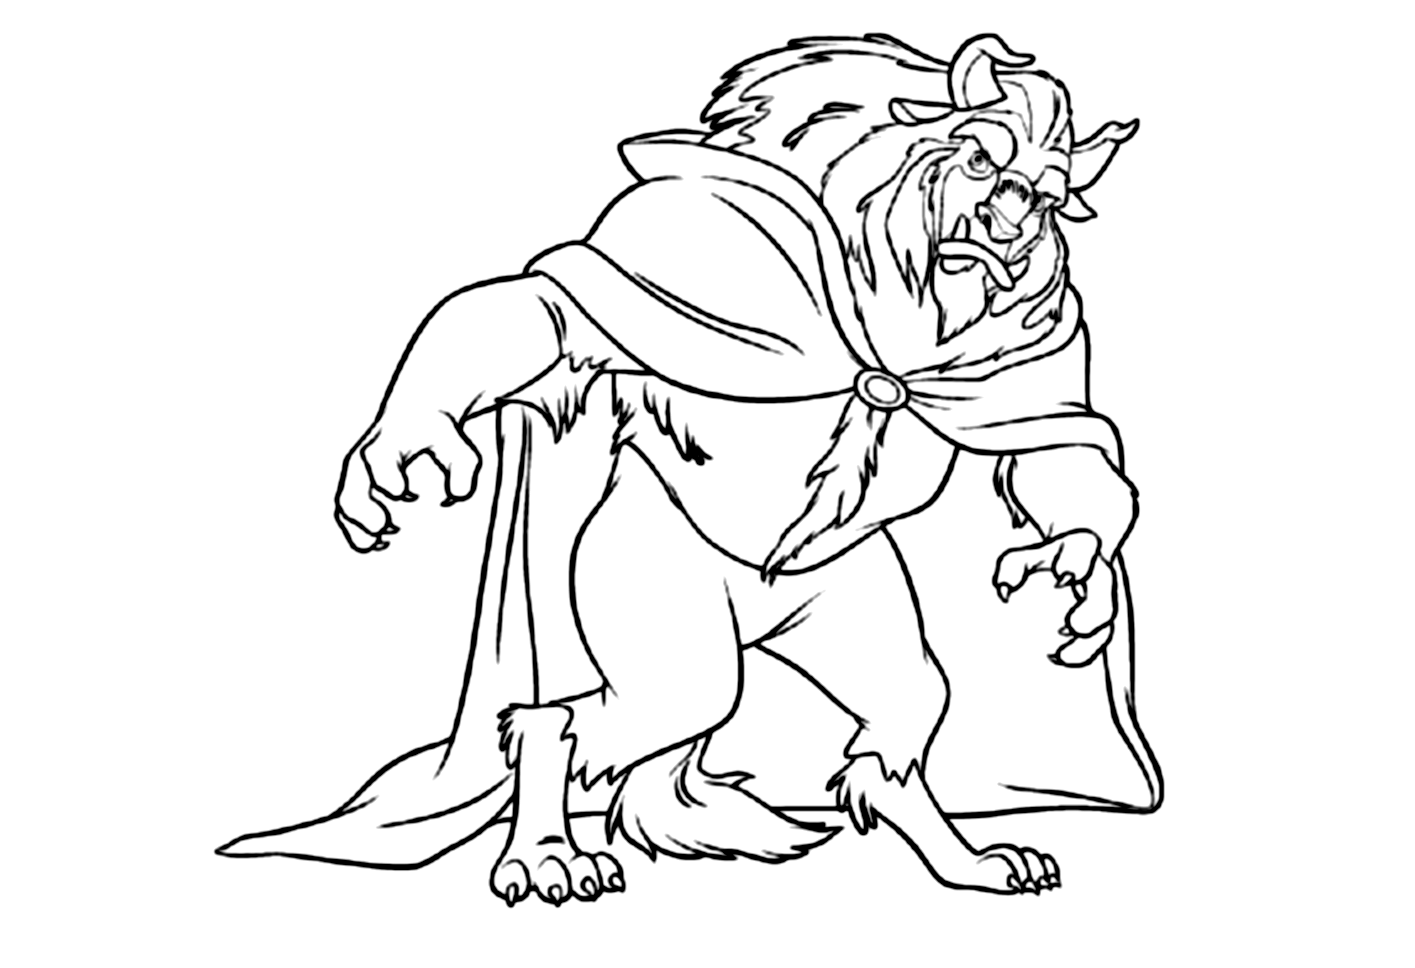 The Beast Coloring Page